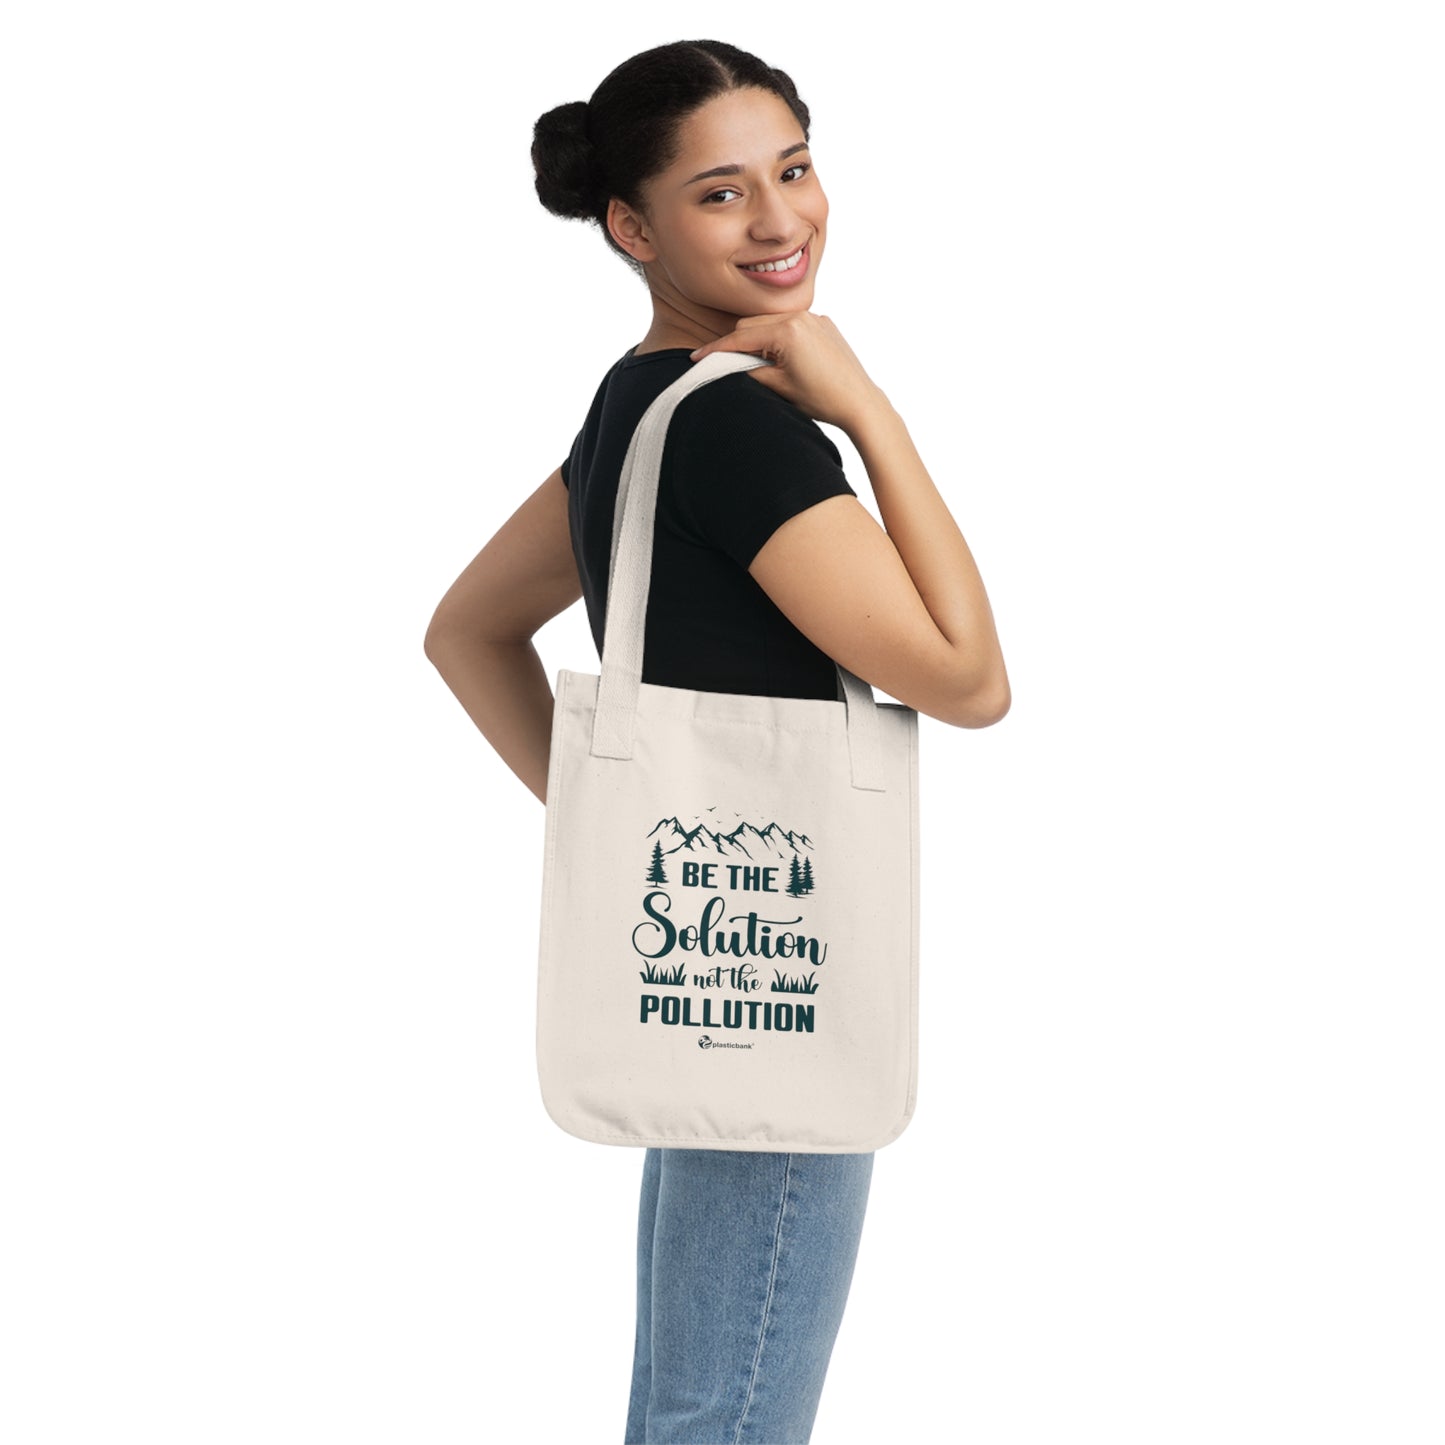 Be The Solution Not The Pollution Tote Bag